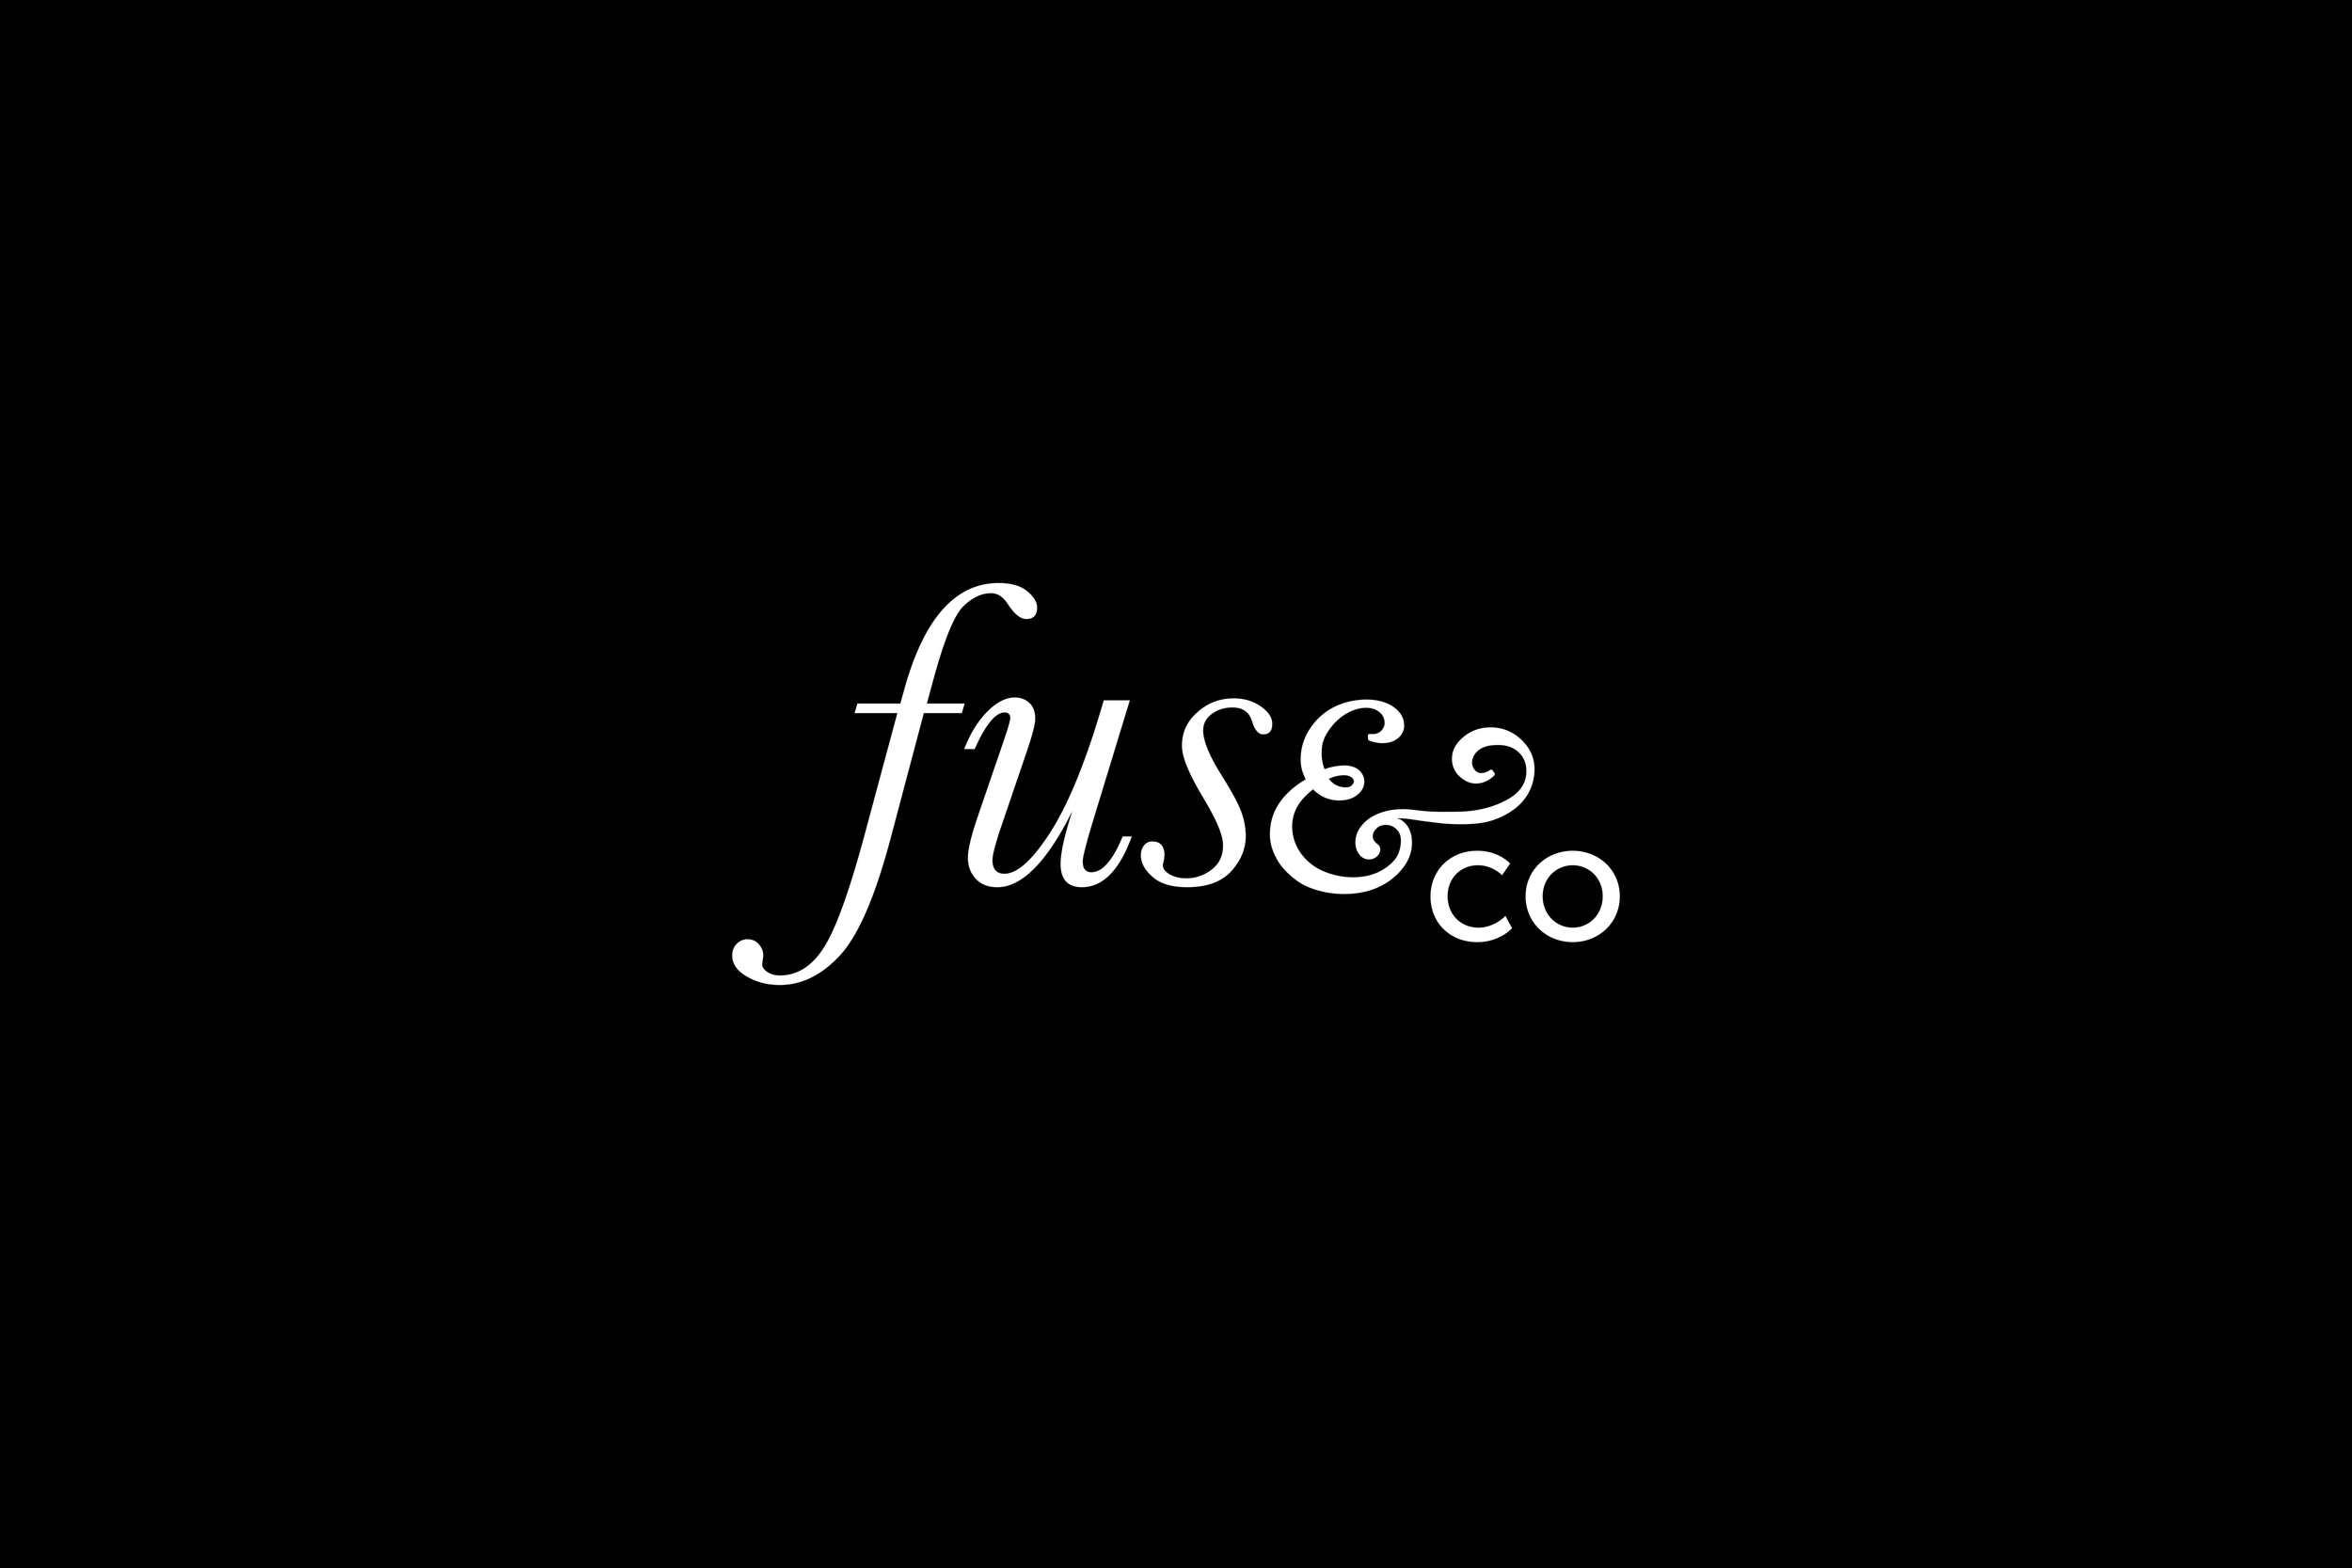 fuse and co.jpg